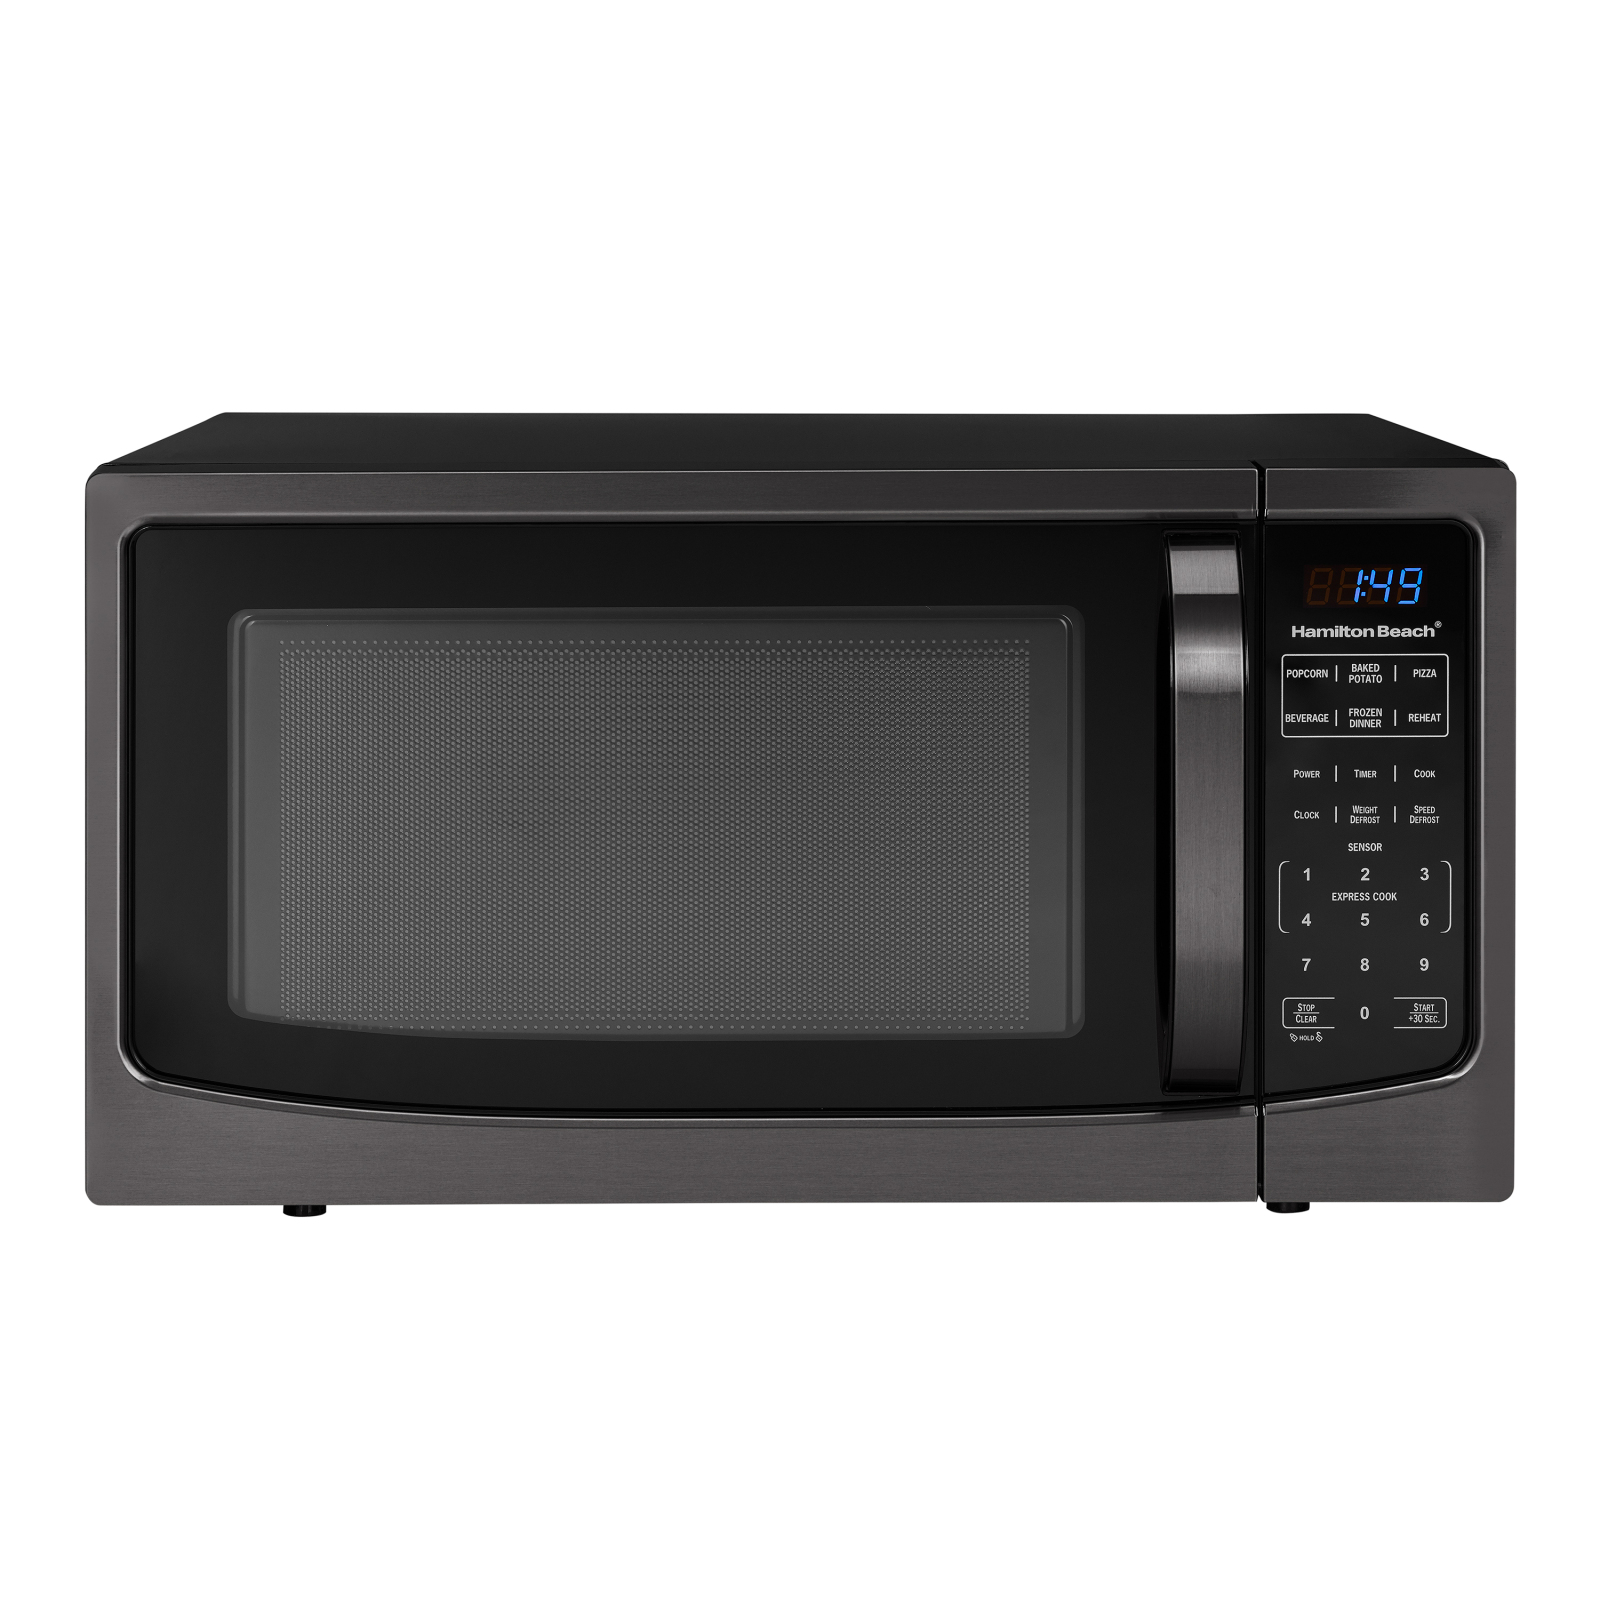 Hamilton Beach 1.6 Cu ft Black Stainless Steel Digital Microwave Oven, New - image 4 of 5